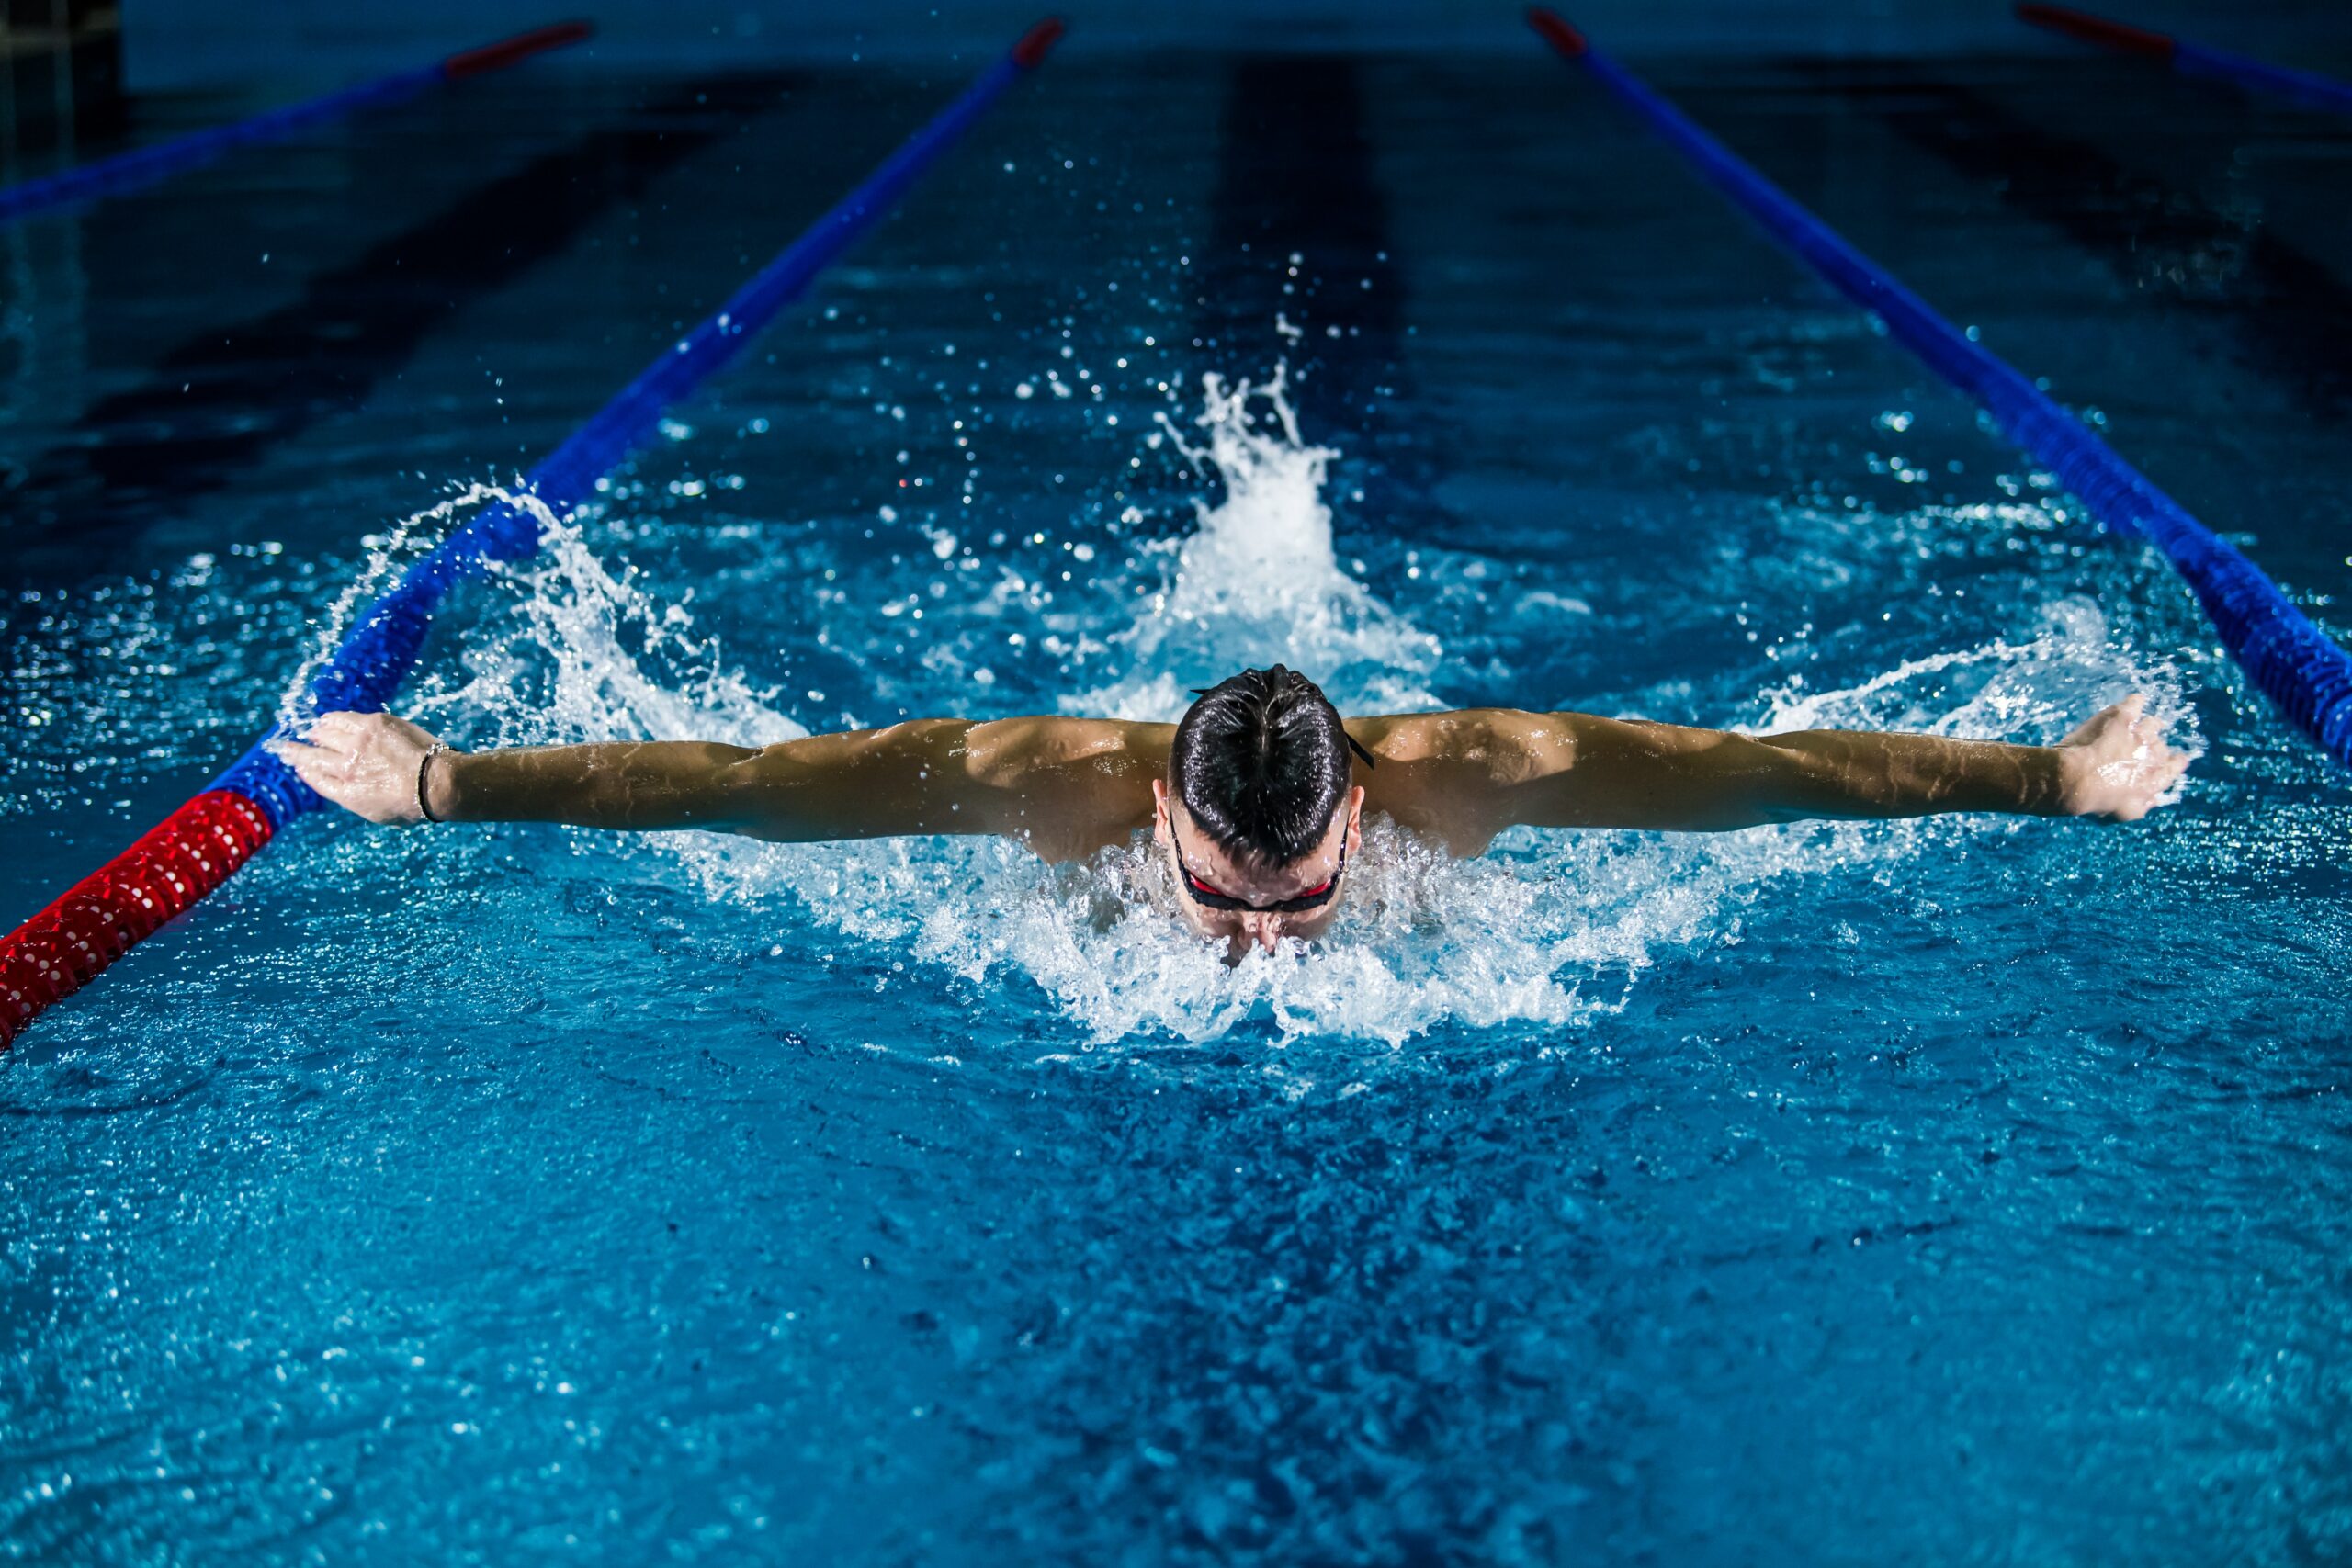 A shot of a swimmer heading back into the water after taking a moment to come up to the surface during a butterfly stroke.